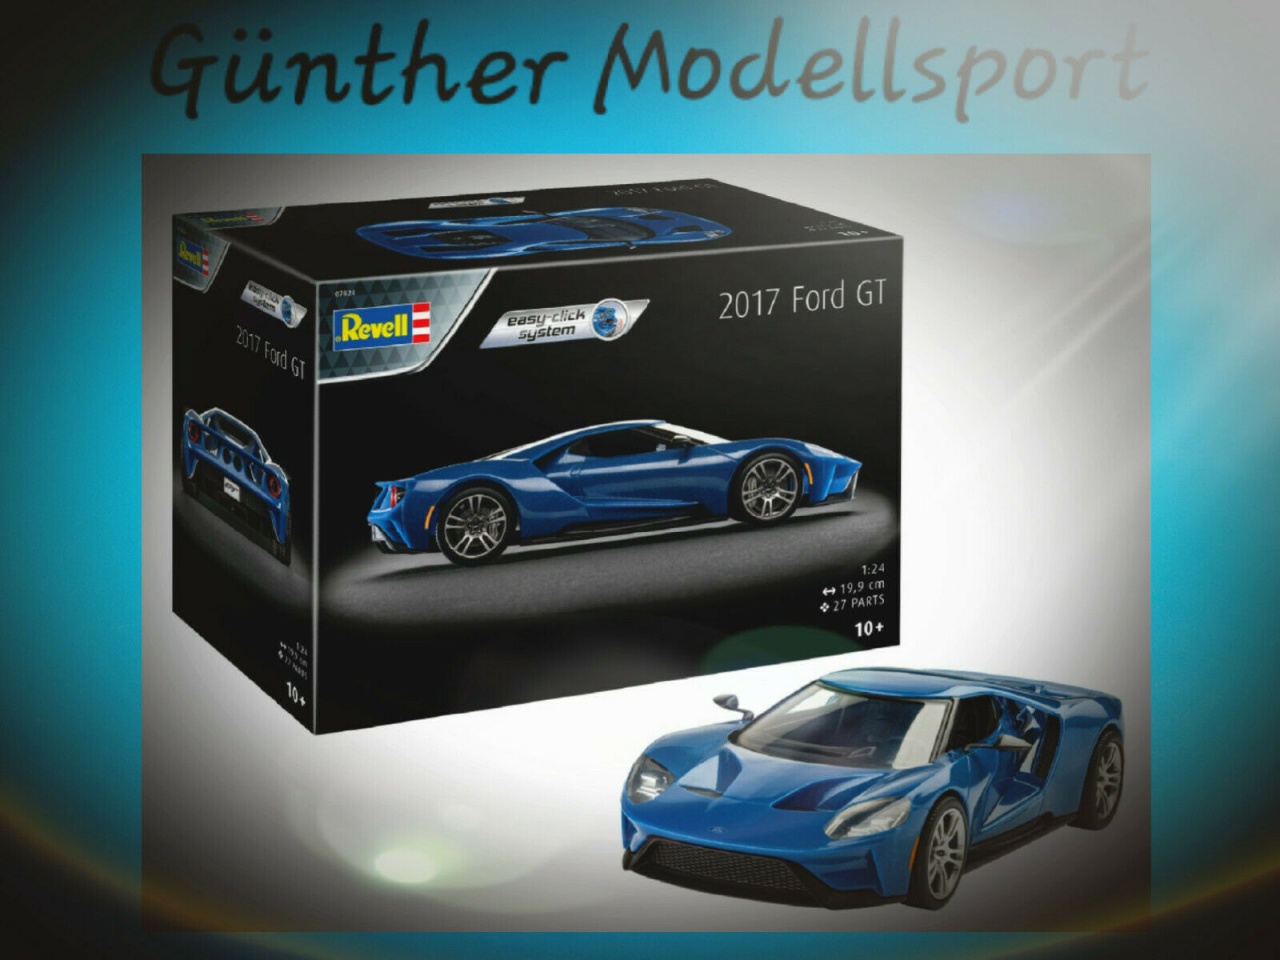 Revell easy-click system 2017 Ford GT, 07824